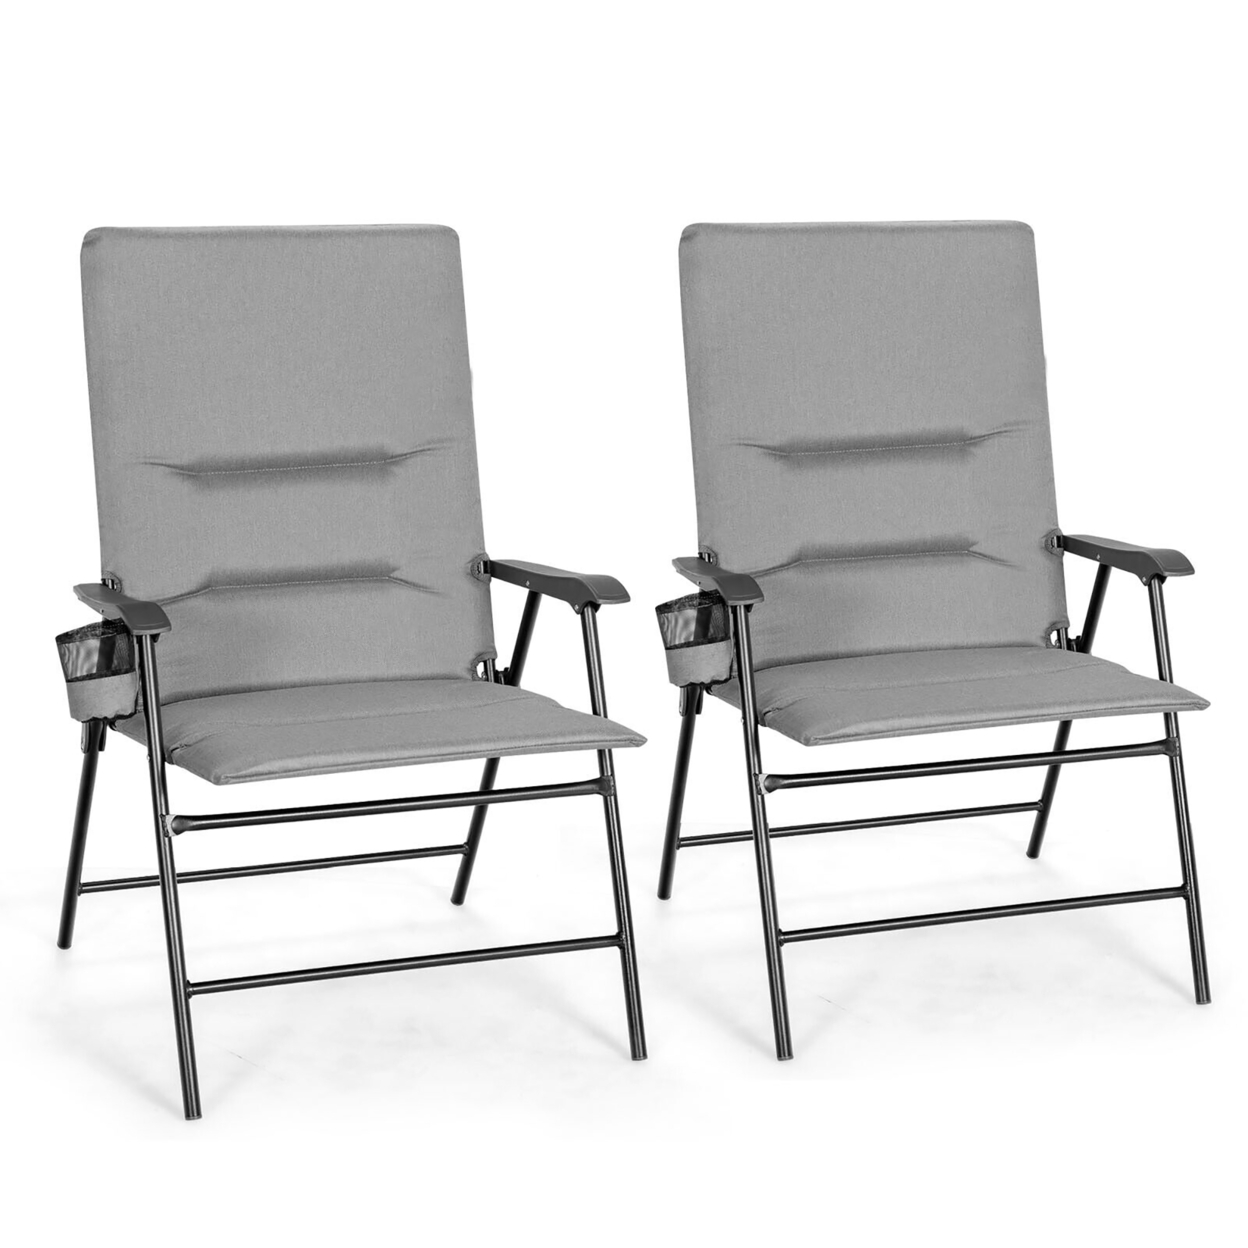 Set Of 2 Patio Camping Dining Chair Portable Padded Folding Chair Outdoor - Grey